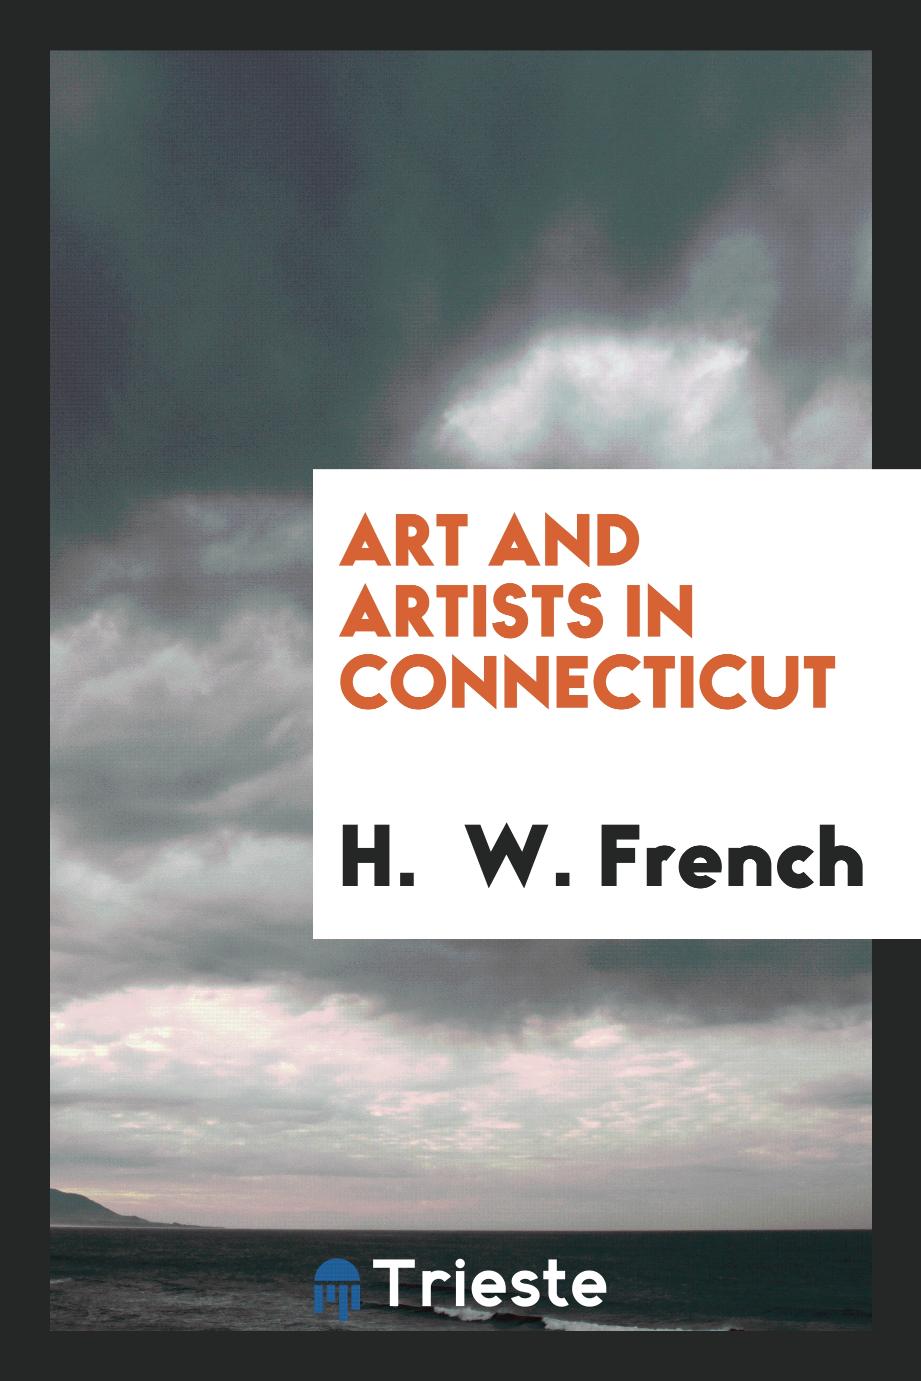 Art and artists in Connecticut